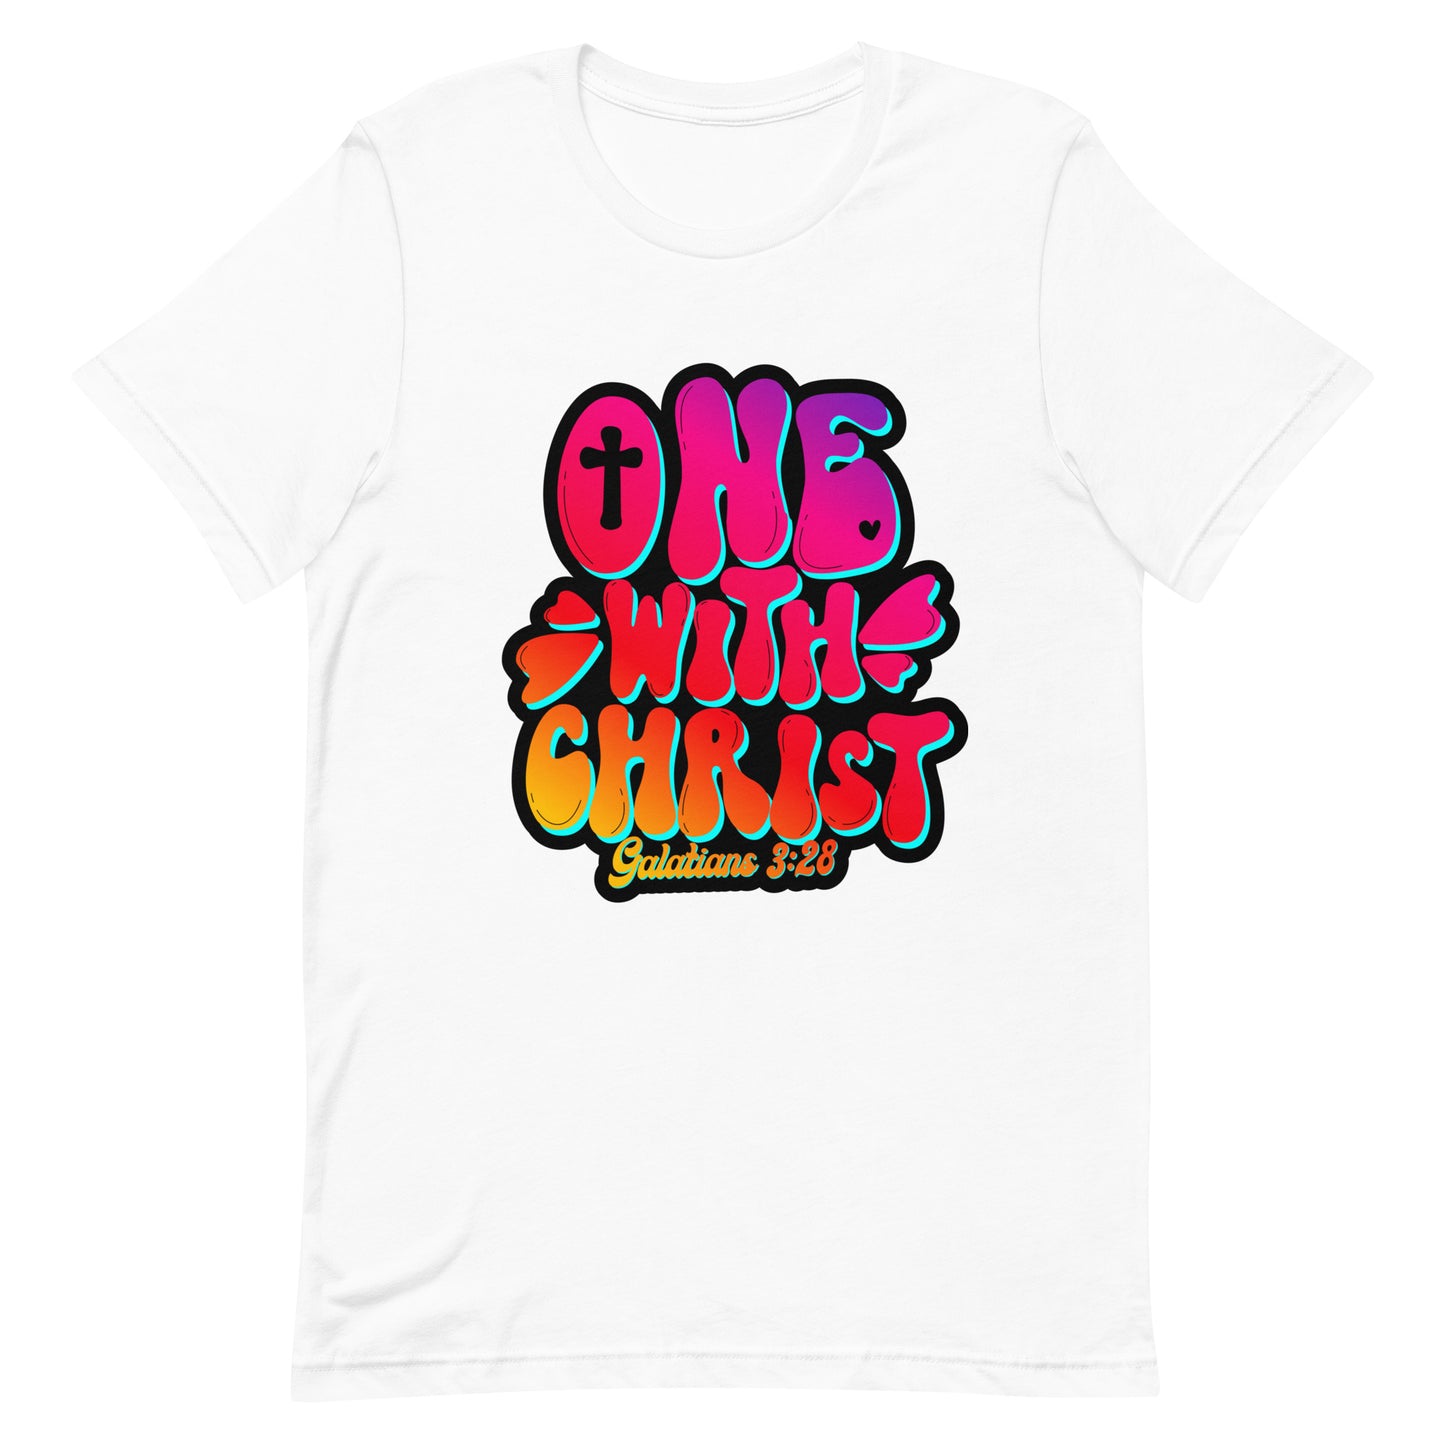 "One with Christ" T-shirt